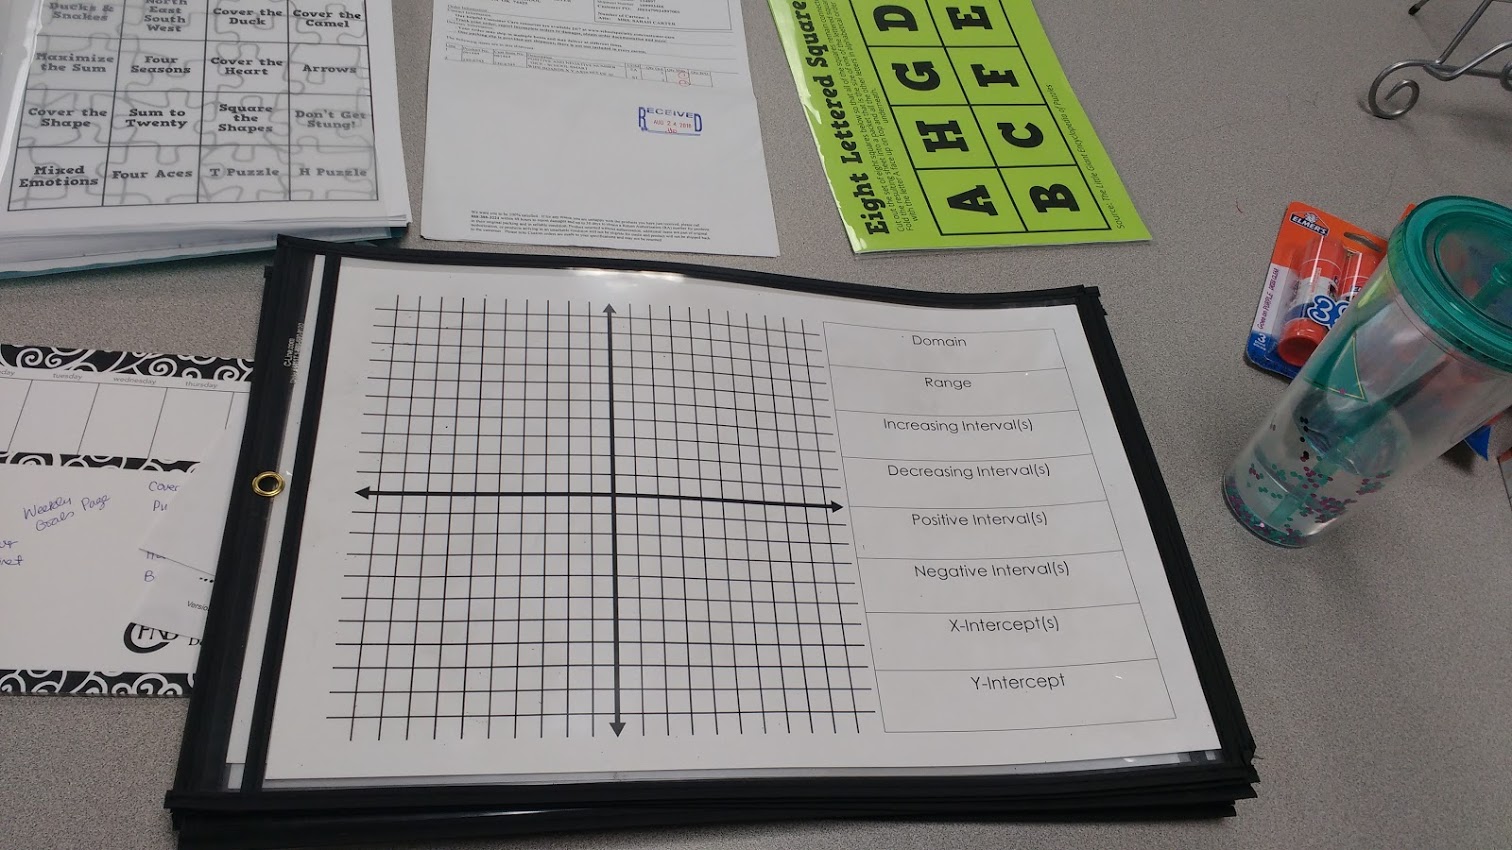 key features of functions chart in dry erase pocket.